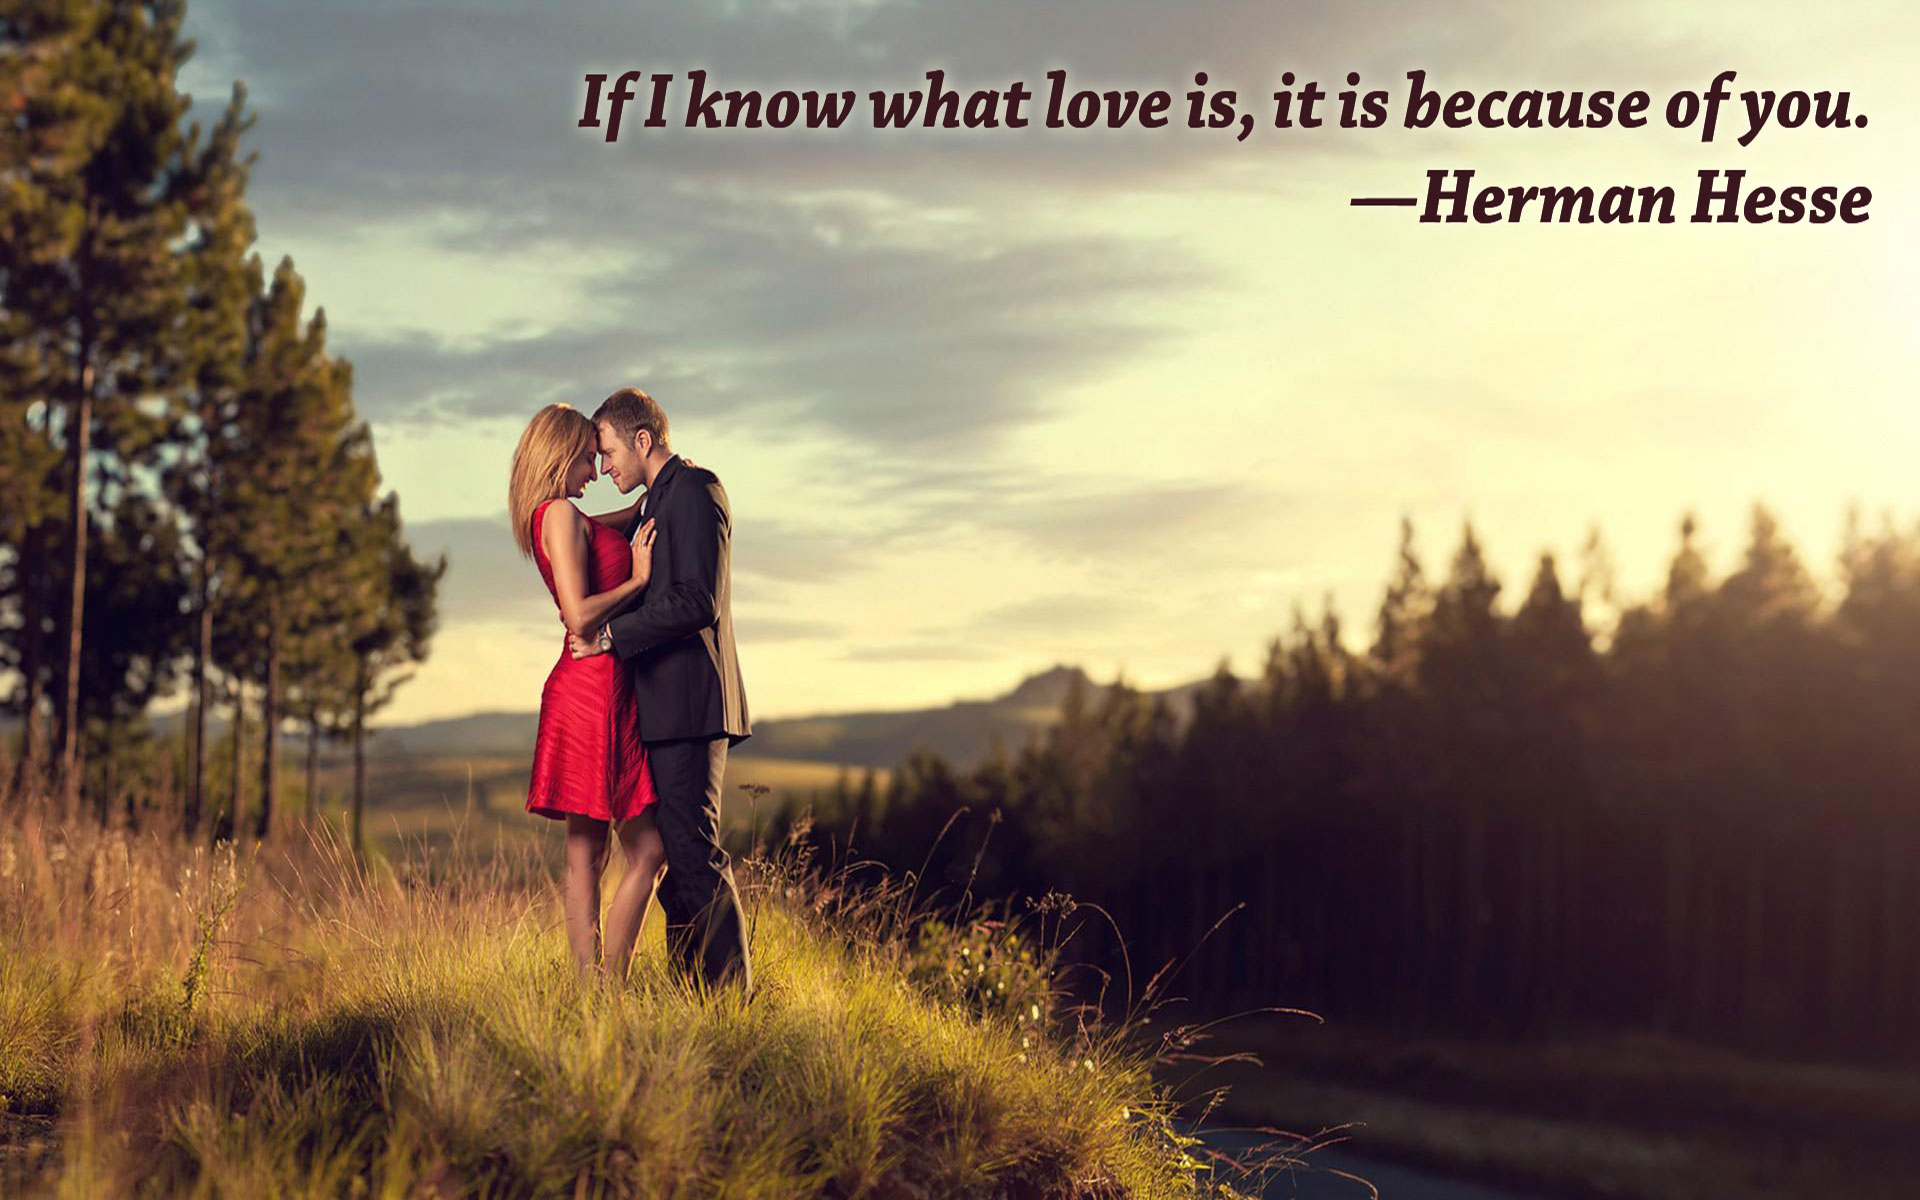 love quotes with romantic couple images